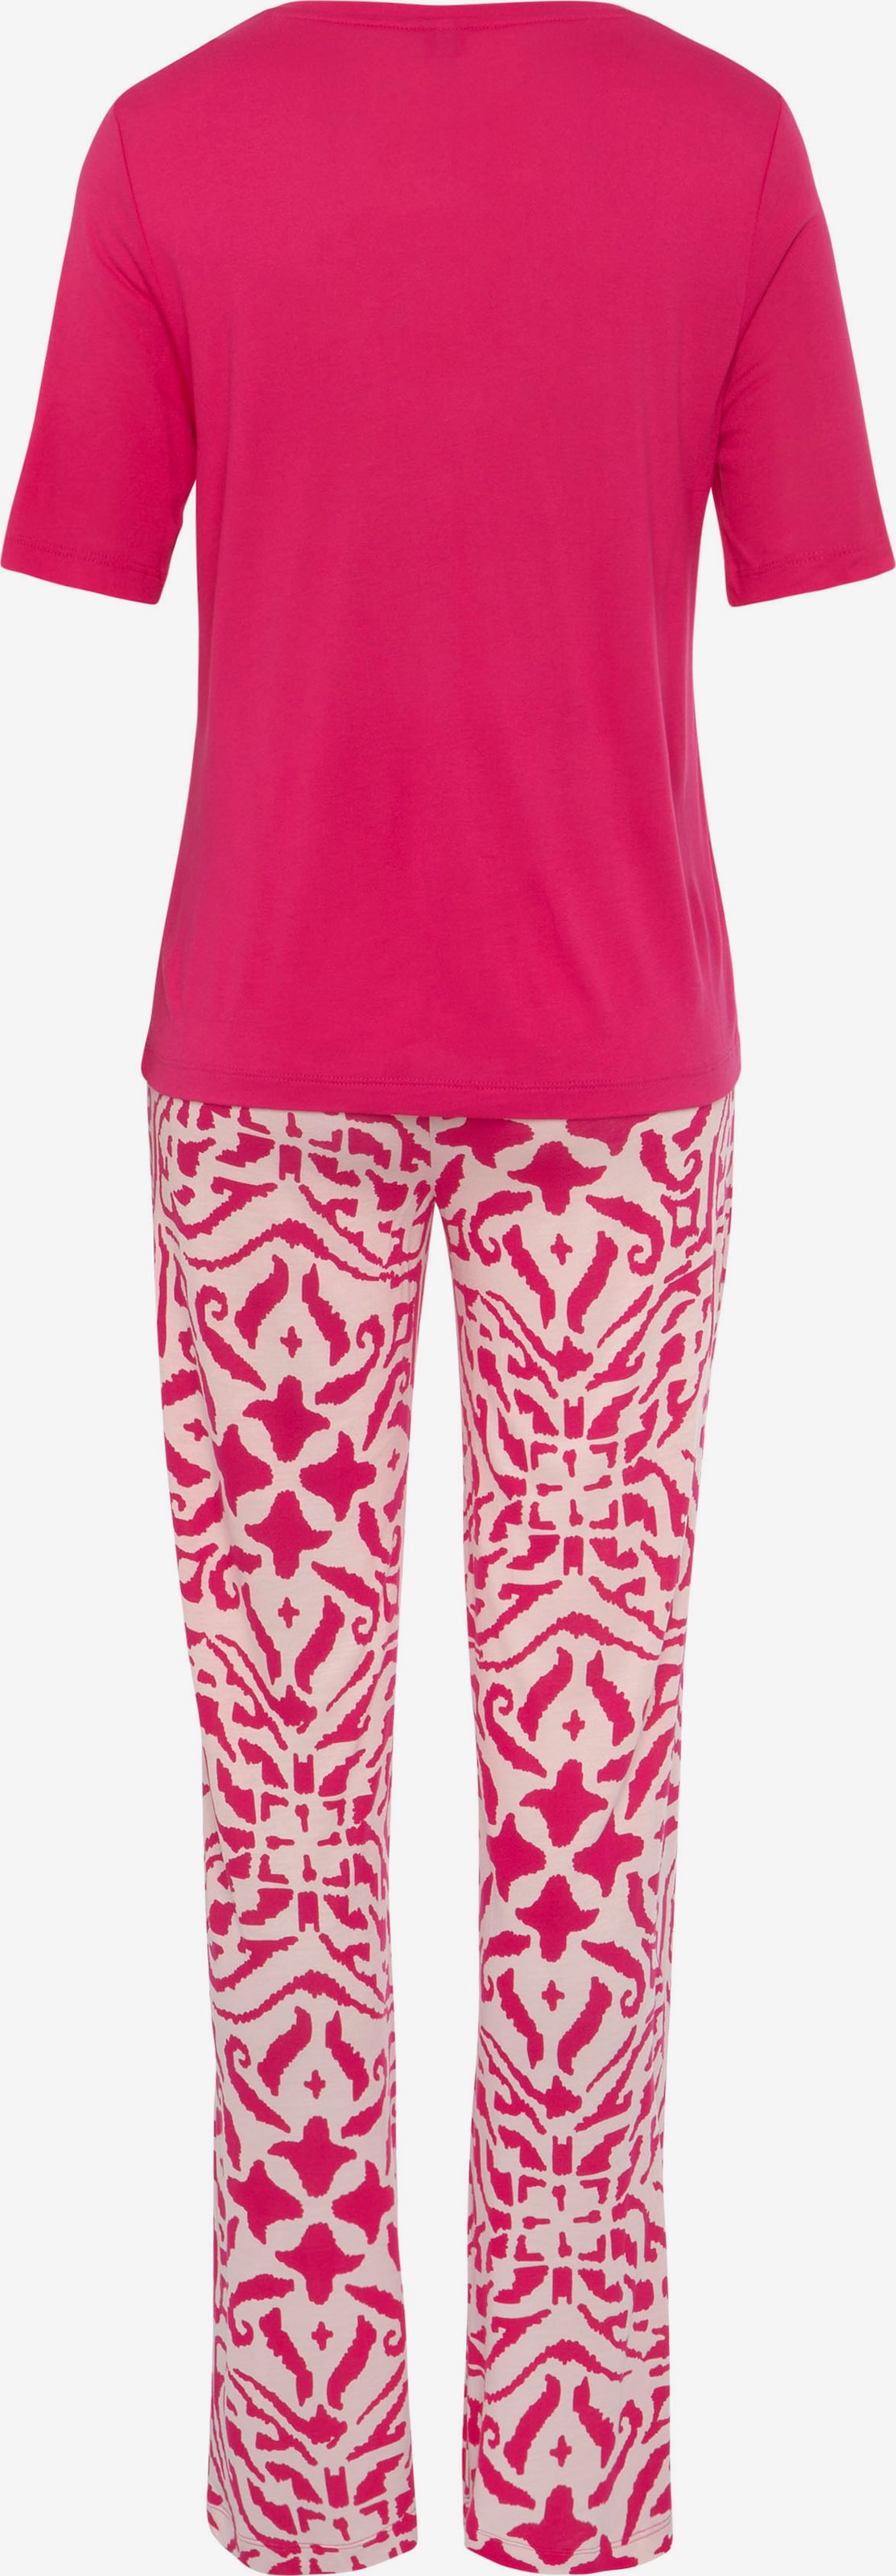 s.Oliver Pyjama ABOUT in YOU Pink 